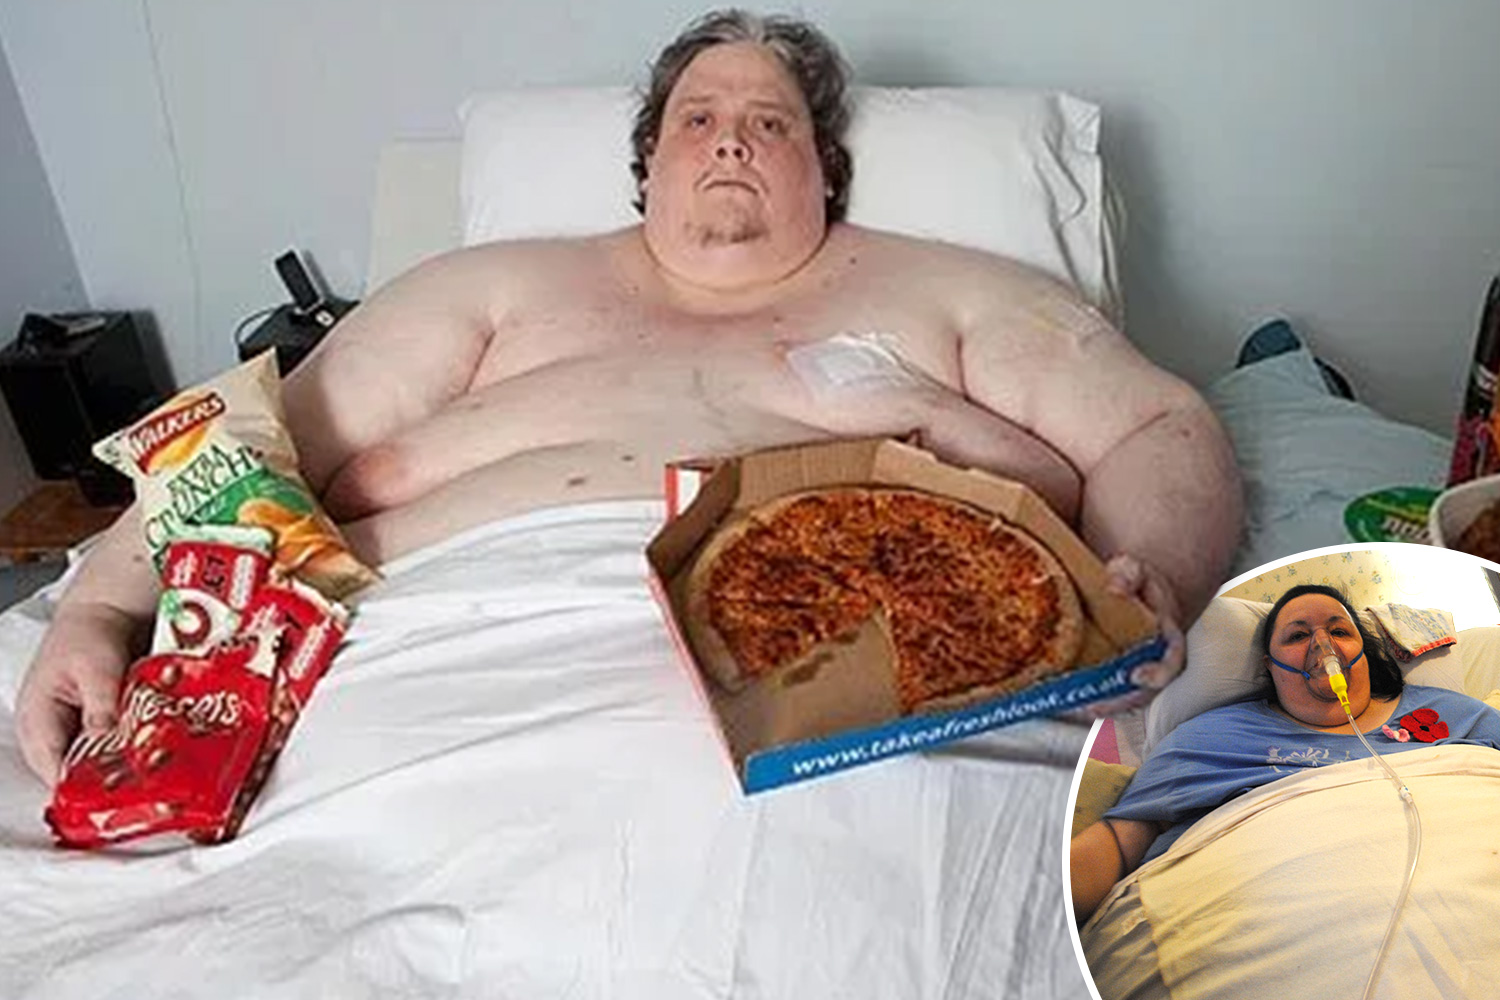 ac-comp-obese-guy-in-bed-with-pizza-and-junk-food.jpg